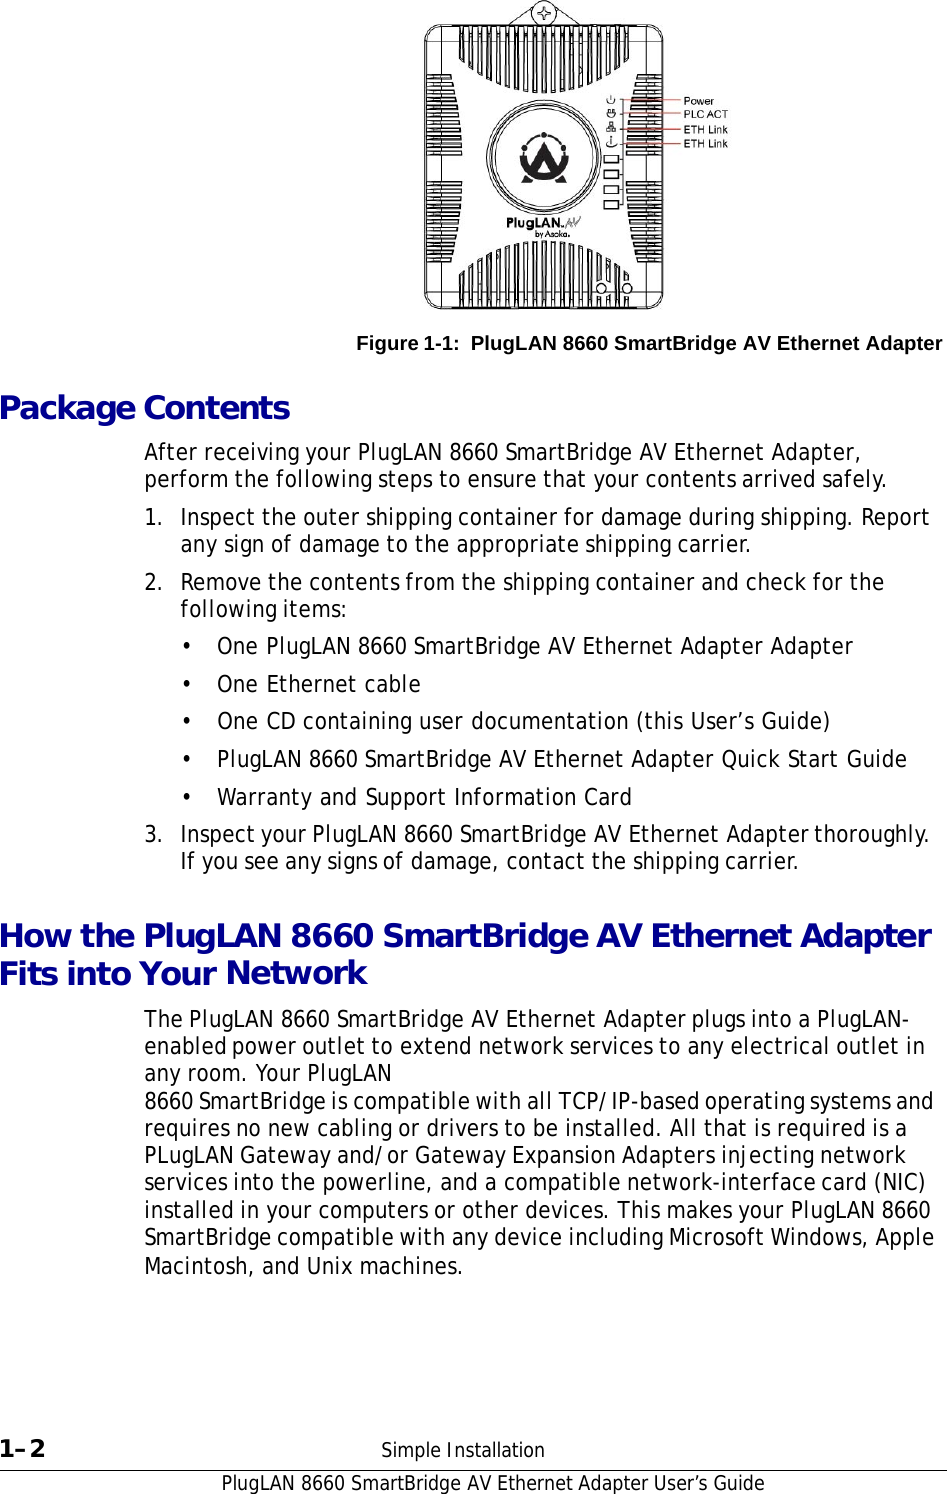 PlugLAN 8660 SmartBridge AV Ethernet Adapter User’s Guide             Figure 1-1:  PlugLAN 8660 SmartBridge AV Ethernet Adapter   Package Contents  After receiving your PlugLAN 8660 SmartBridge AV Ethernet Adapter, perform the following steps to ensure that your contents arrived safely.  1.  Inspect the outer shipping container for damage during shipping. Report any sign of damage to the appropriate shipping carrier. 2.  Remove the contents from the shipping container and check for the following items:  •  One PlugLAN 8660 SmartBridge AV Ethernet Adapter Adapter  • One Ethernet cable  •  One CD containing user documentation (this User’s Guide)  •  PlugLAN 8660 SmartBridge AV Ethernet Adapter Quick Start Guide  • Warranty and Support Information Card  3.  Inspect your PlugLAN 8660 SmartBridge AV Ethernet Adapter thoroughly. If you see any signs of damage, contact the shipping carrier.   How the PlugLAN 8660 SmartBridge AV Ethernet Adapter Fits into Your Network  The PlugLAN 8660 SmartBridge AV Ethernet Adapter plugs into a PlugLAN-enabled power outlet to extend network services to any electrical outlet in any room. Your PlugLAN 8660 SmartBridge is compatible with all TCP/IP-based operating systems and requires no new cabling or drivers to be installed. All that is required is a PLugLAN Gateway and/or Gateway Expansion Adapters injecting network services into the powerline, and a compatible network-interface card (NIC) installed in your computers or other devices. This makes your PlugLAN 8660 SmartBridge compatible with any device including Microsoft Windows, Apple Macintosh, and Unix machines.         1–2  Simple Installation 